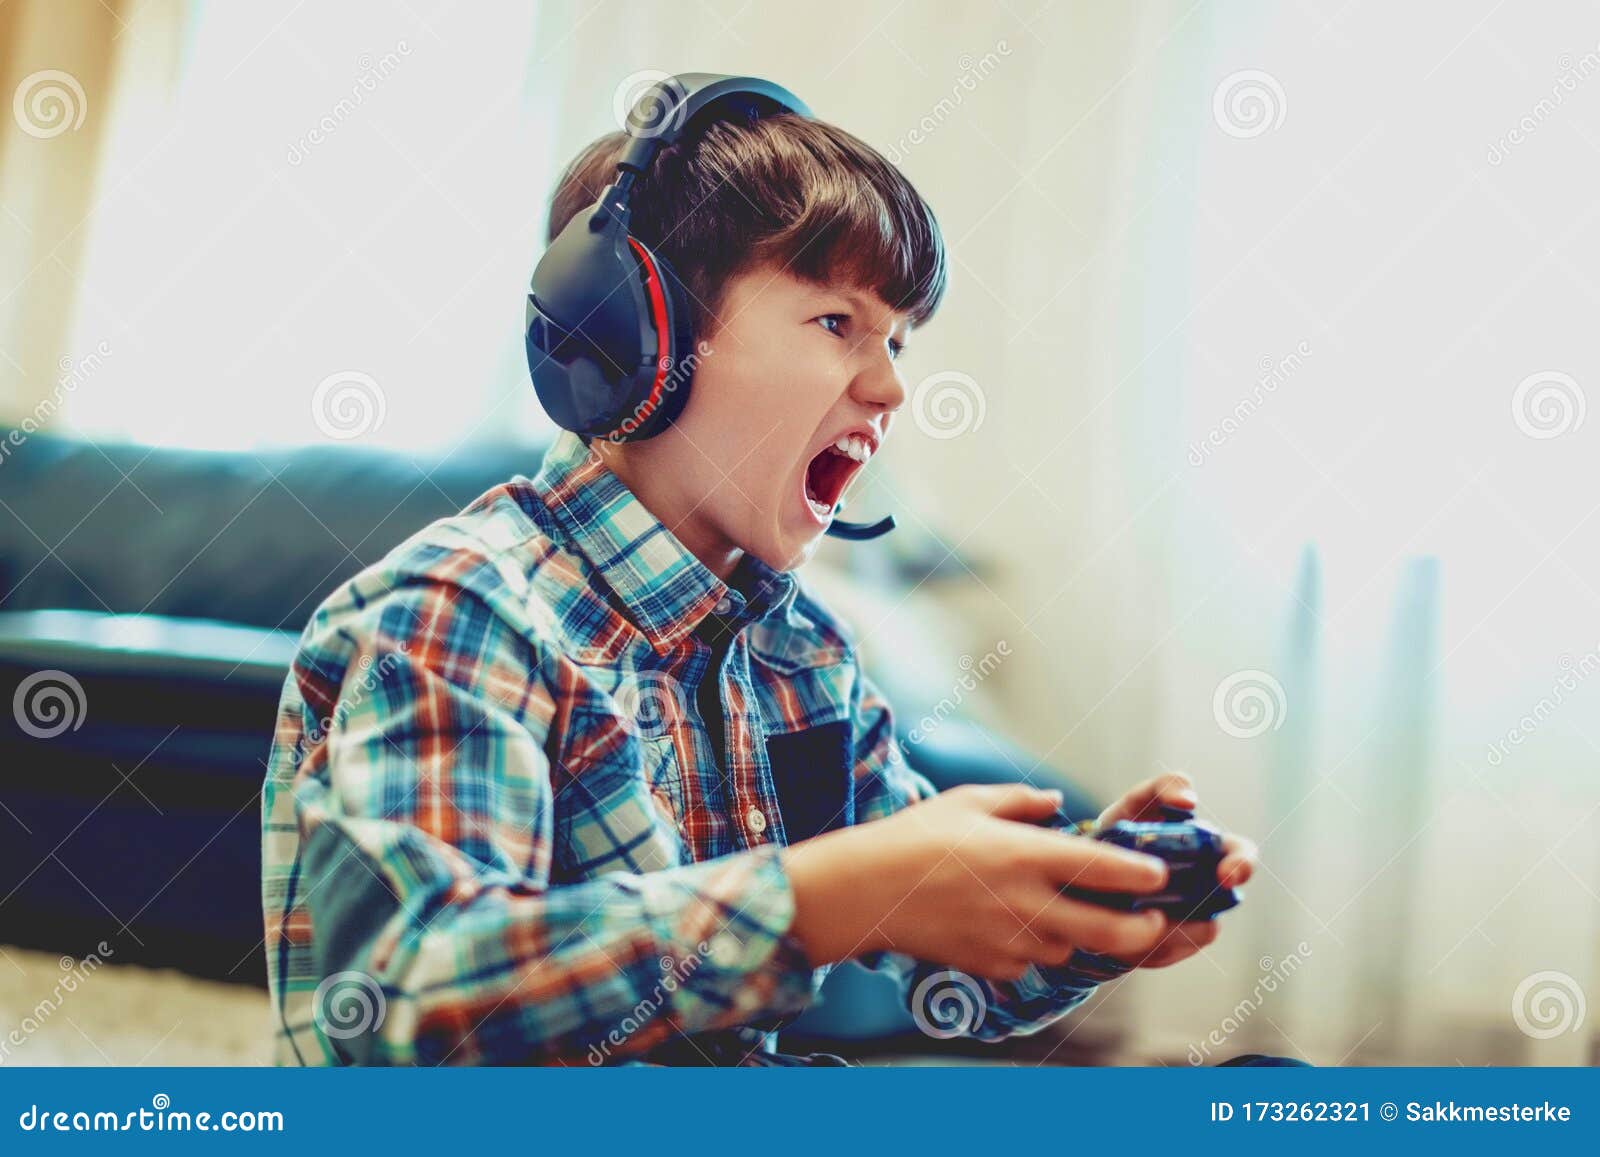 Multiplayer Games Stock Photos & Royalty-Free Images